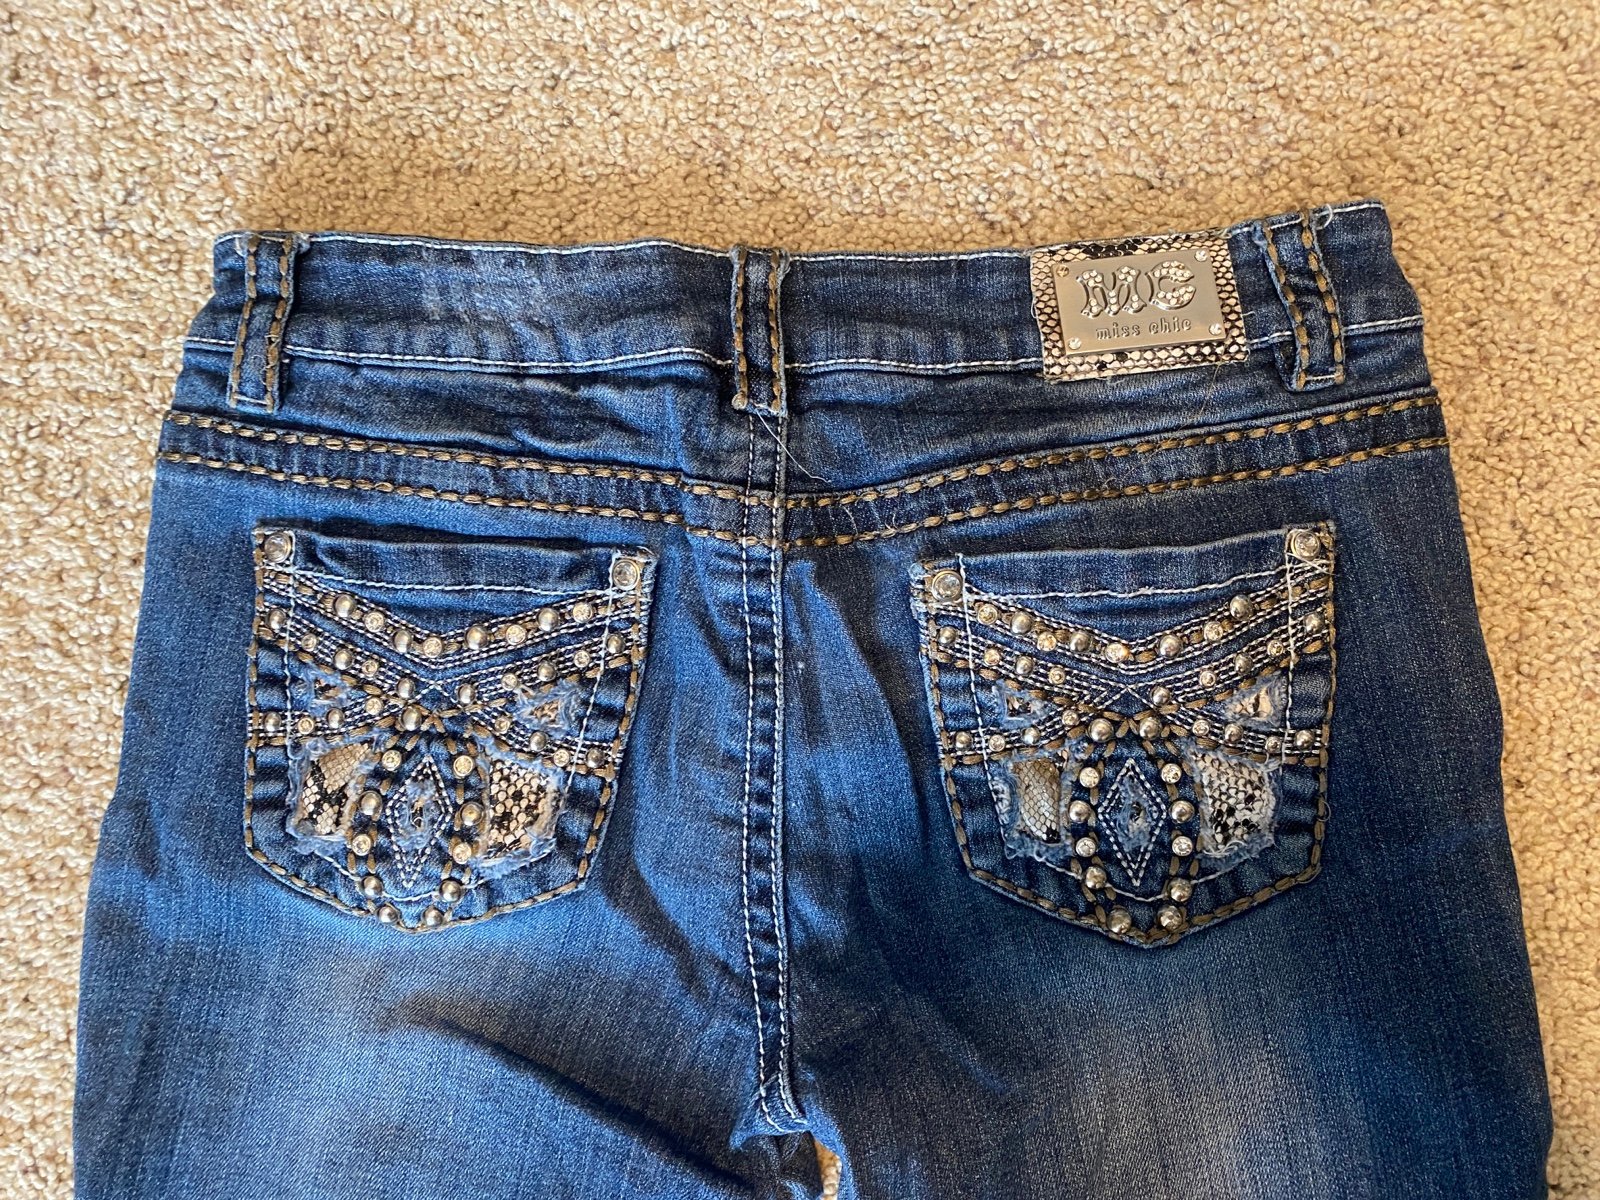 High quality Miss Chic Blue Capri Jeans Womens 9 Embellished Bling Pants 22” inseam JLUYxrxJQ US Sale